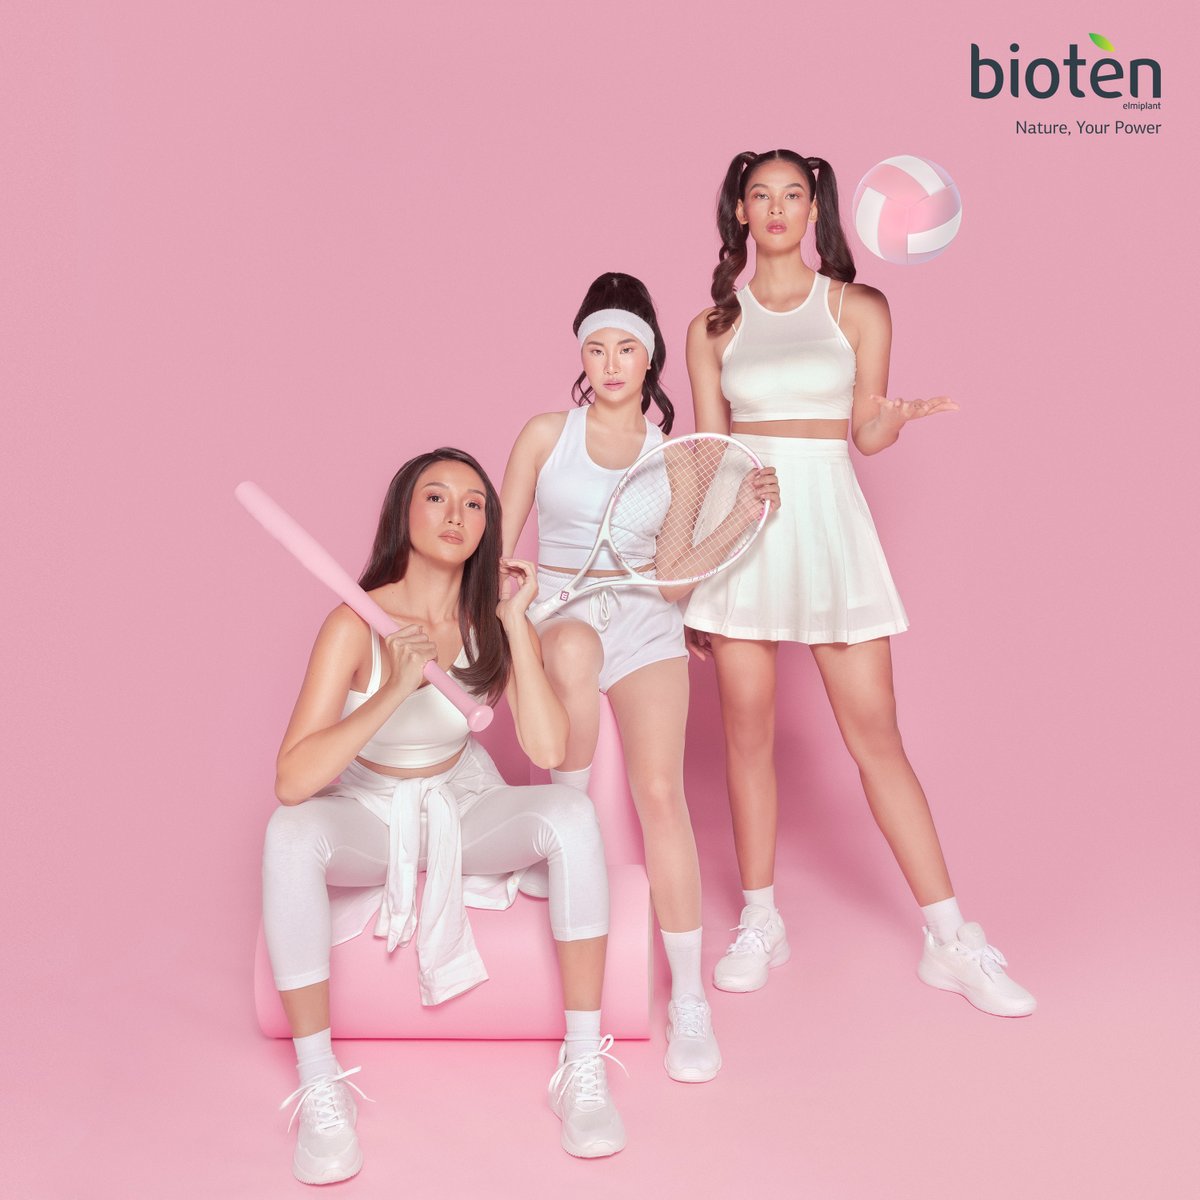 May the best glowlympian win! Channel your radiance with the newest Bioten Skin Glow 💖 You’ll surely find your own inner glow just like @majoybaron, @_angeldei, and @yskaelaa! We’ll see you when the games start 😉 #BiotenPH #FeelRadiant #BiotenPHGlowlympics #BiotenPHSkinGlow